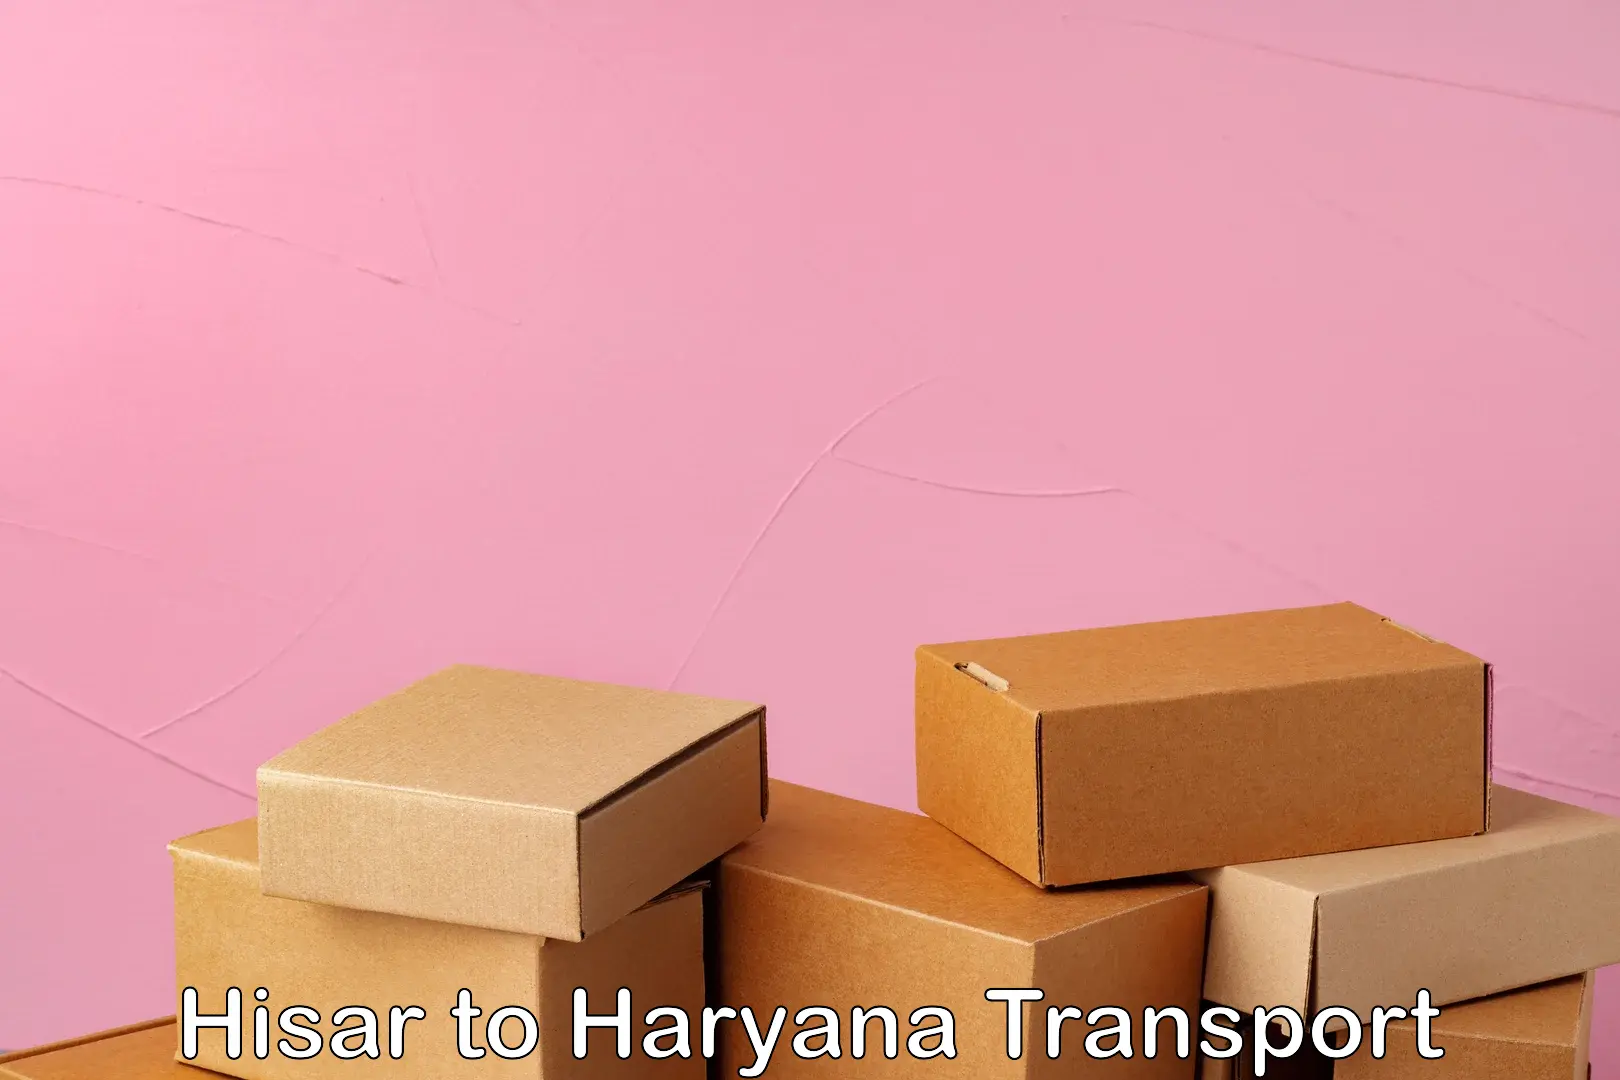 Commercial transport service Hisar to Hisar